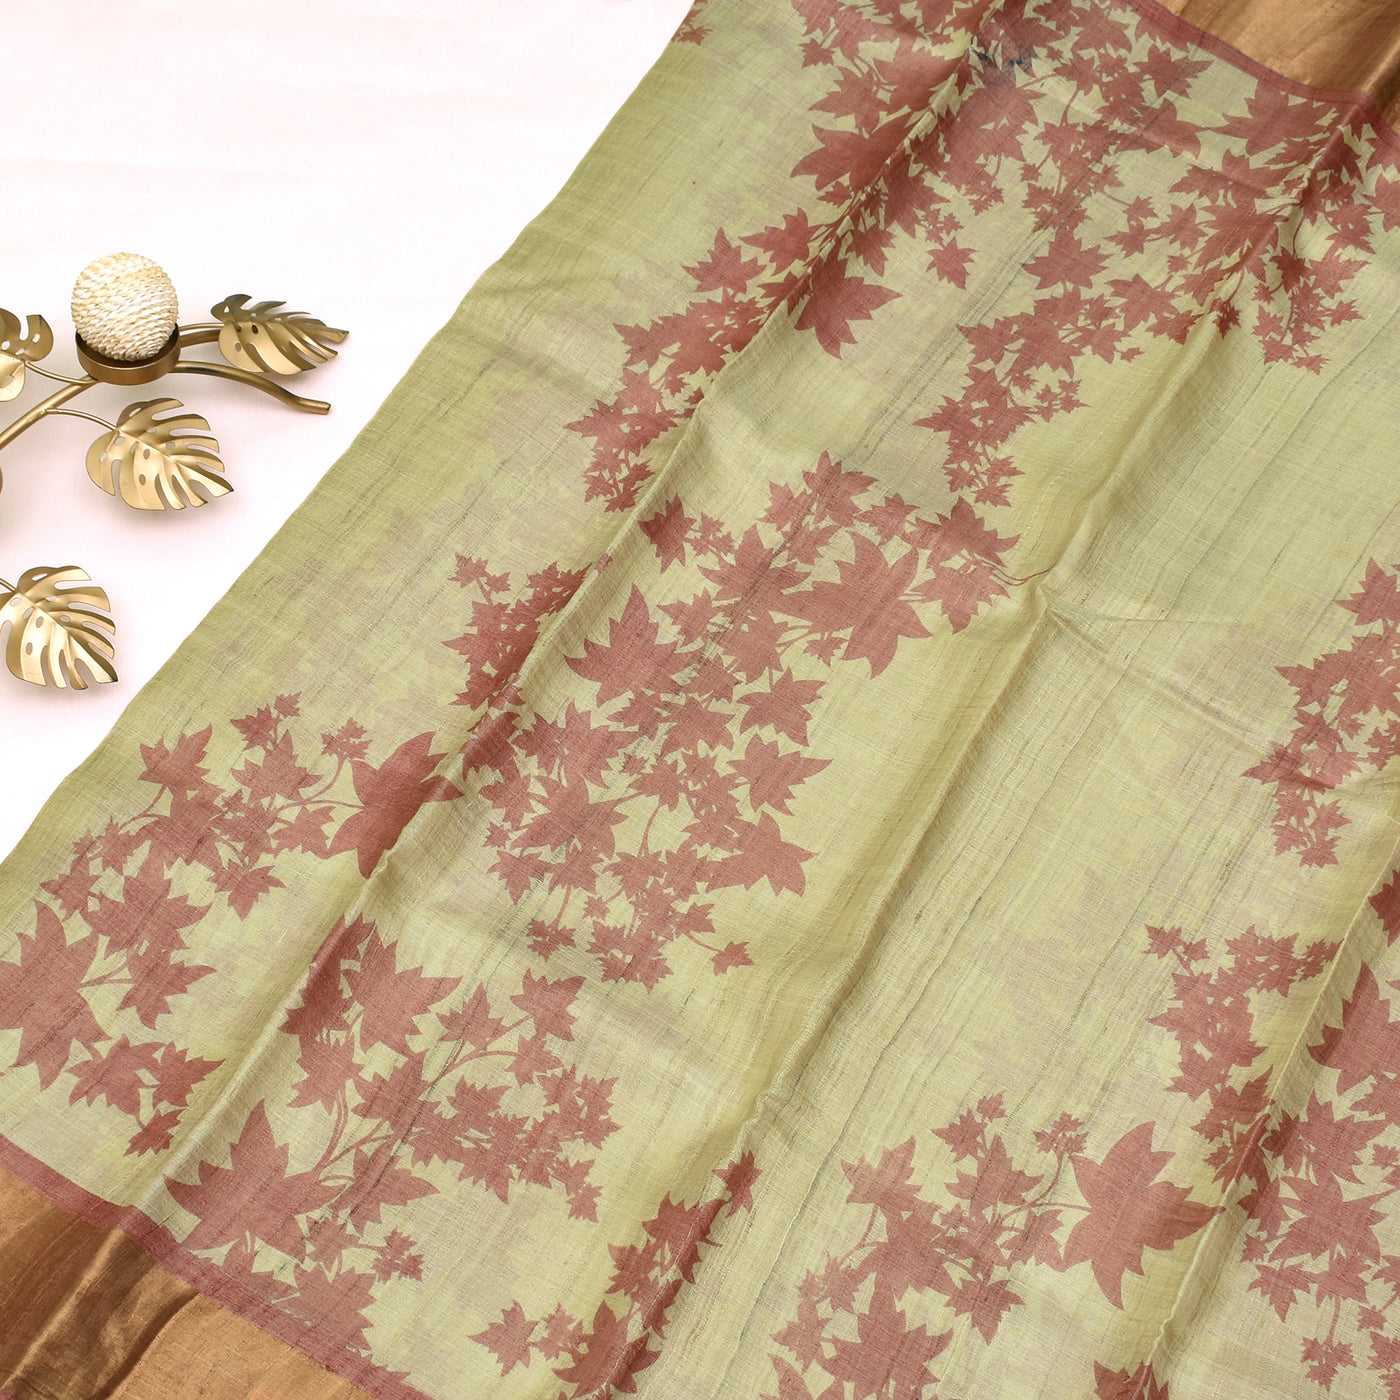 Off White Tussar Printed Saree with Floral Design 